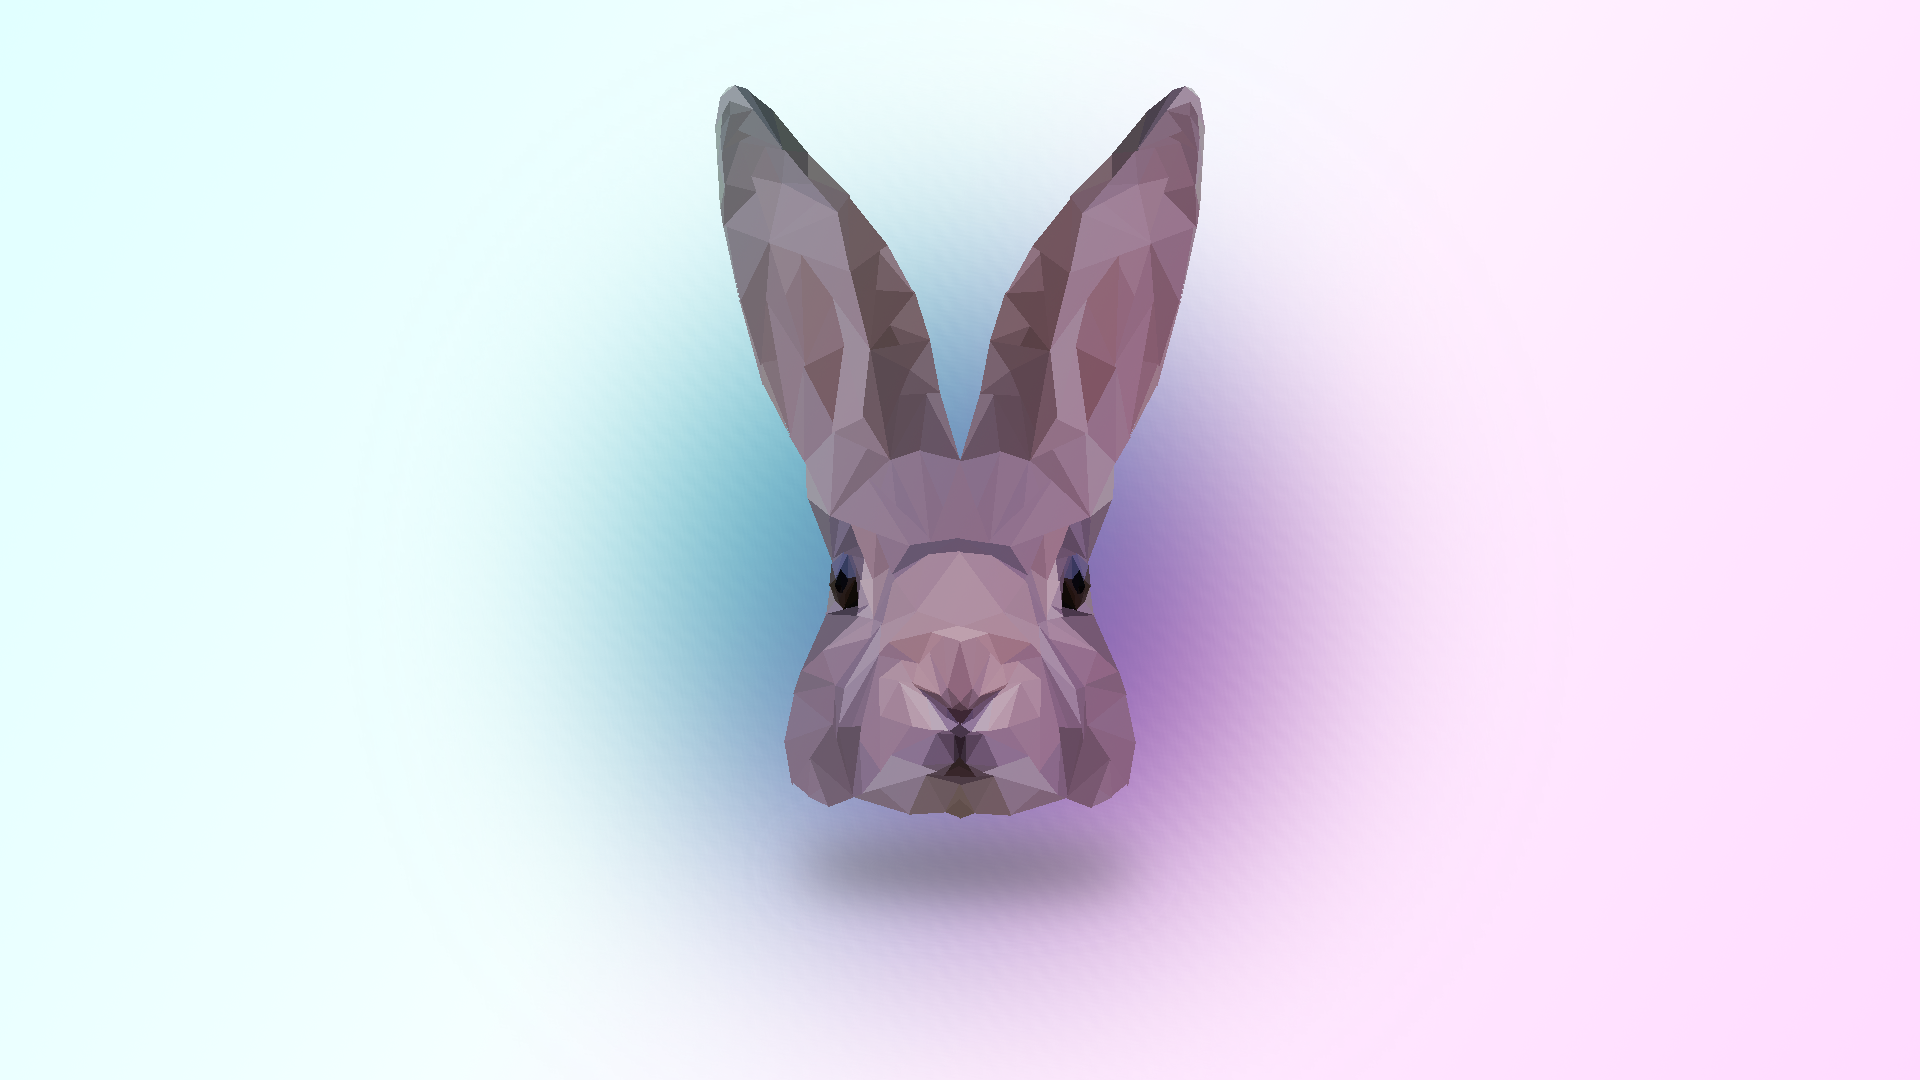 General 1920x1080 low poly animals rabbits bright abstract frontal view